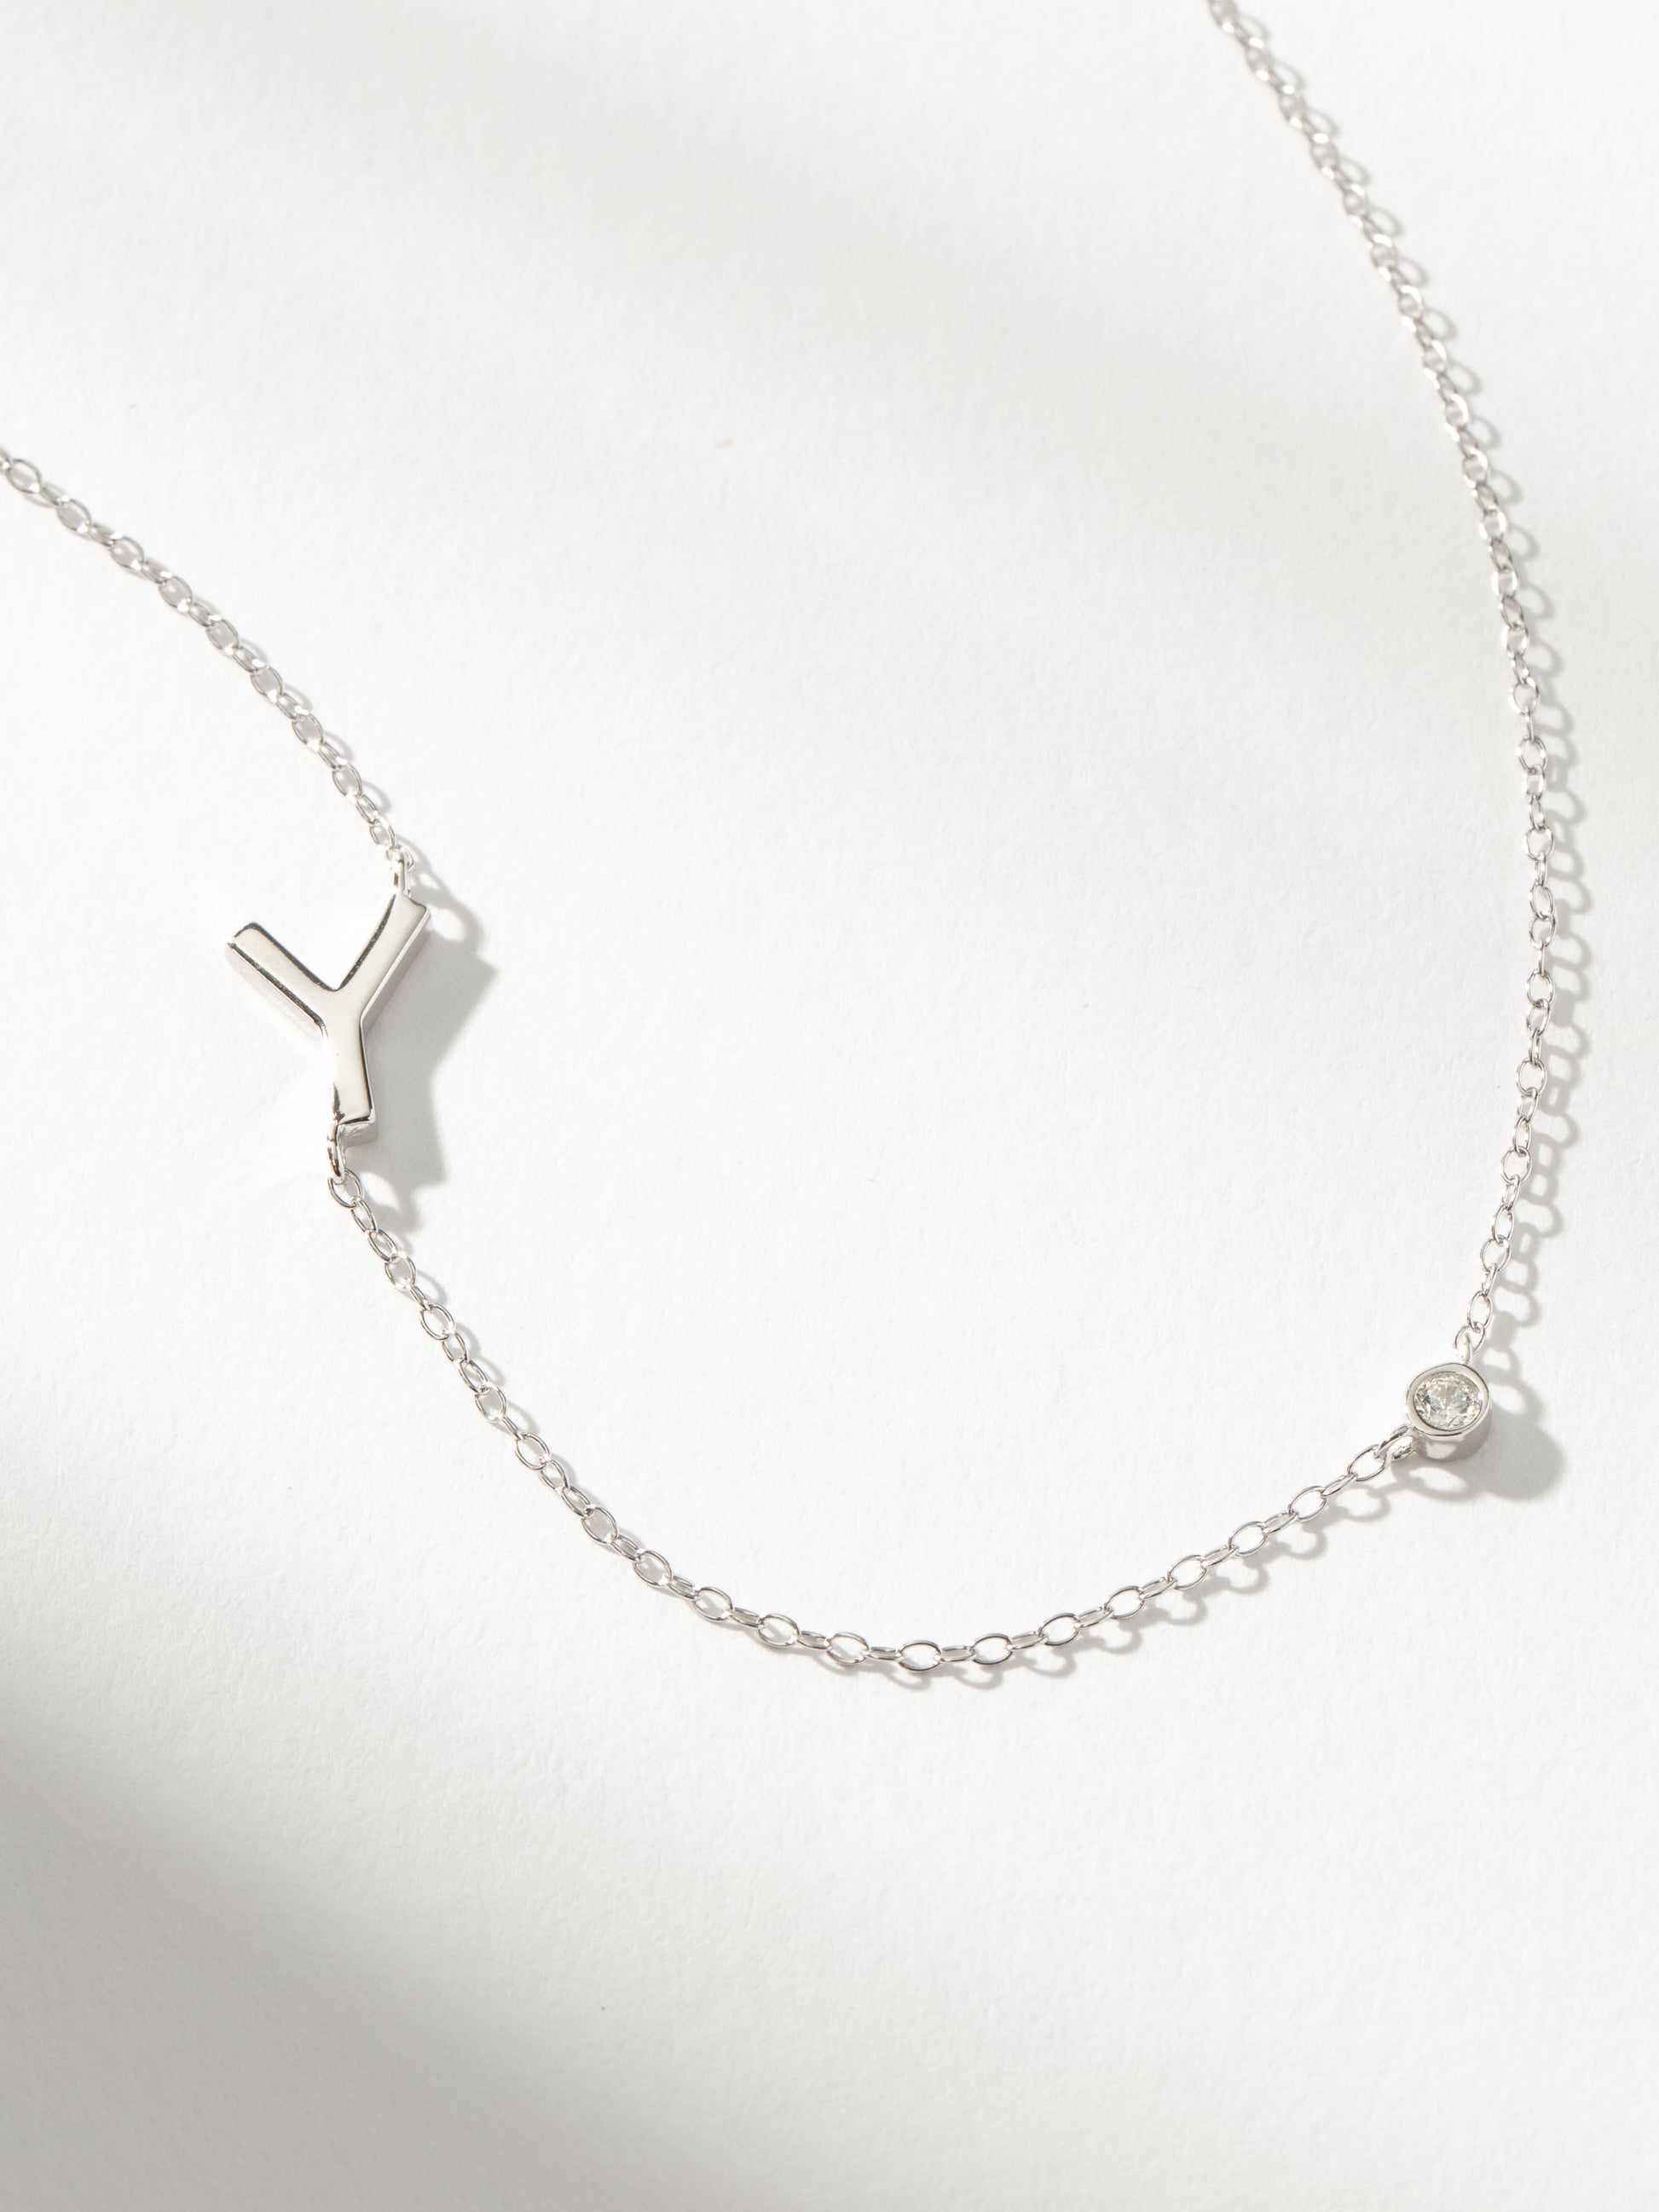 Personalized Touch Necklace | Sterling Silver Y | Product Image | Uncommon James